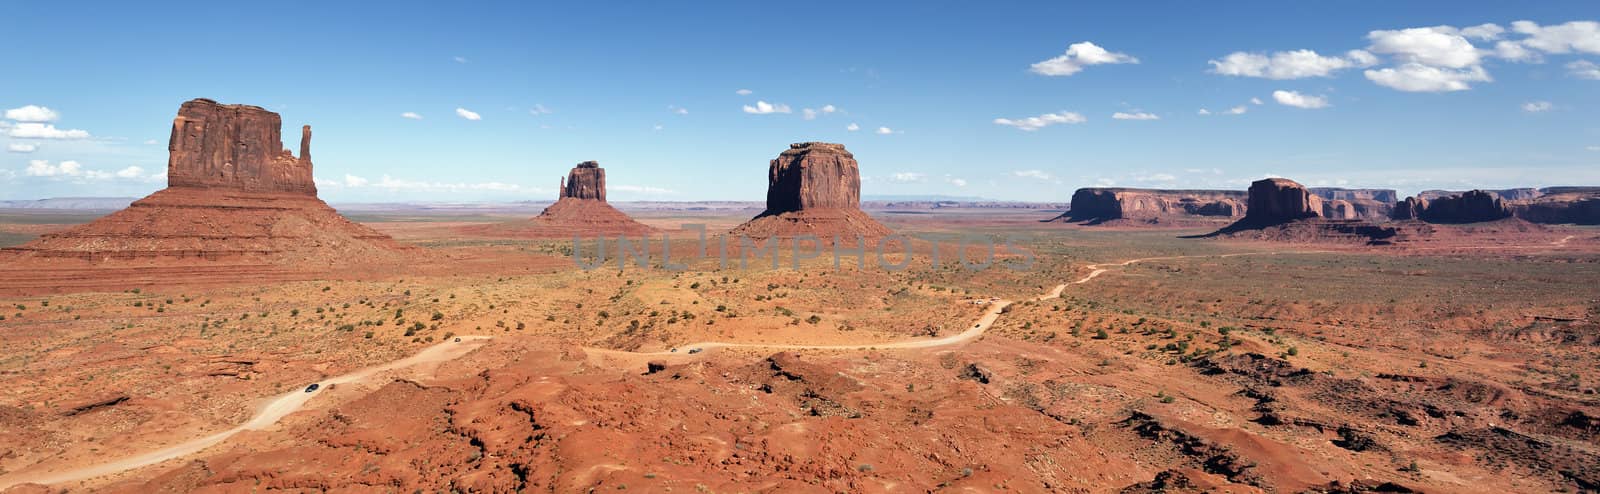 Panoramic view of Monument Valley by vwalakte